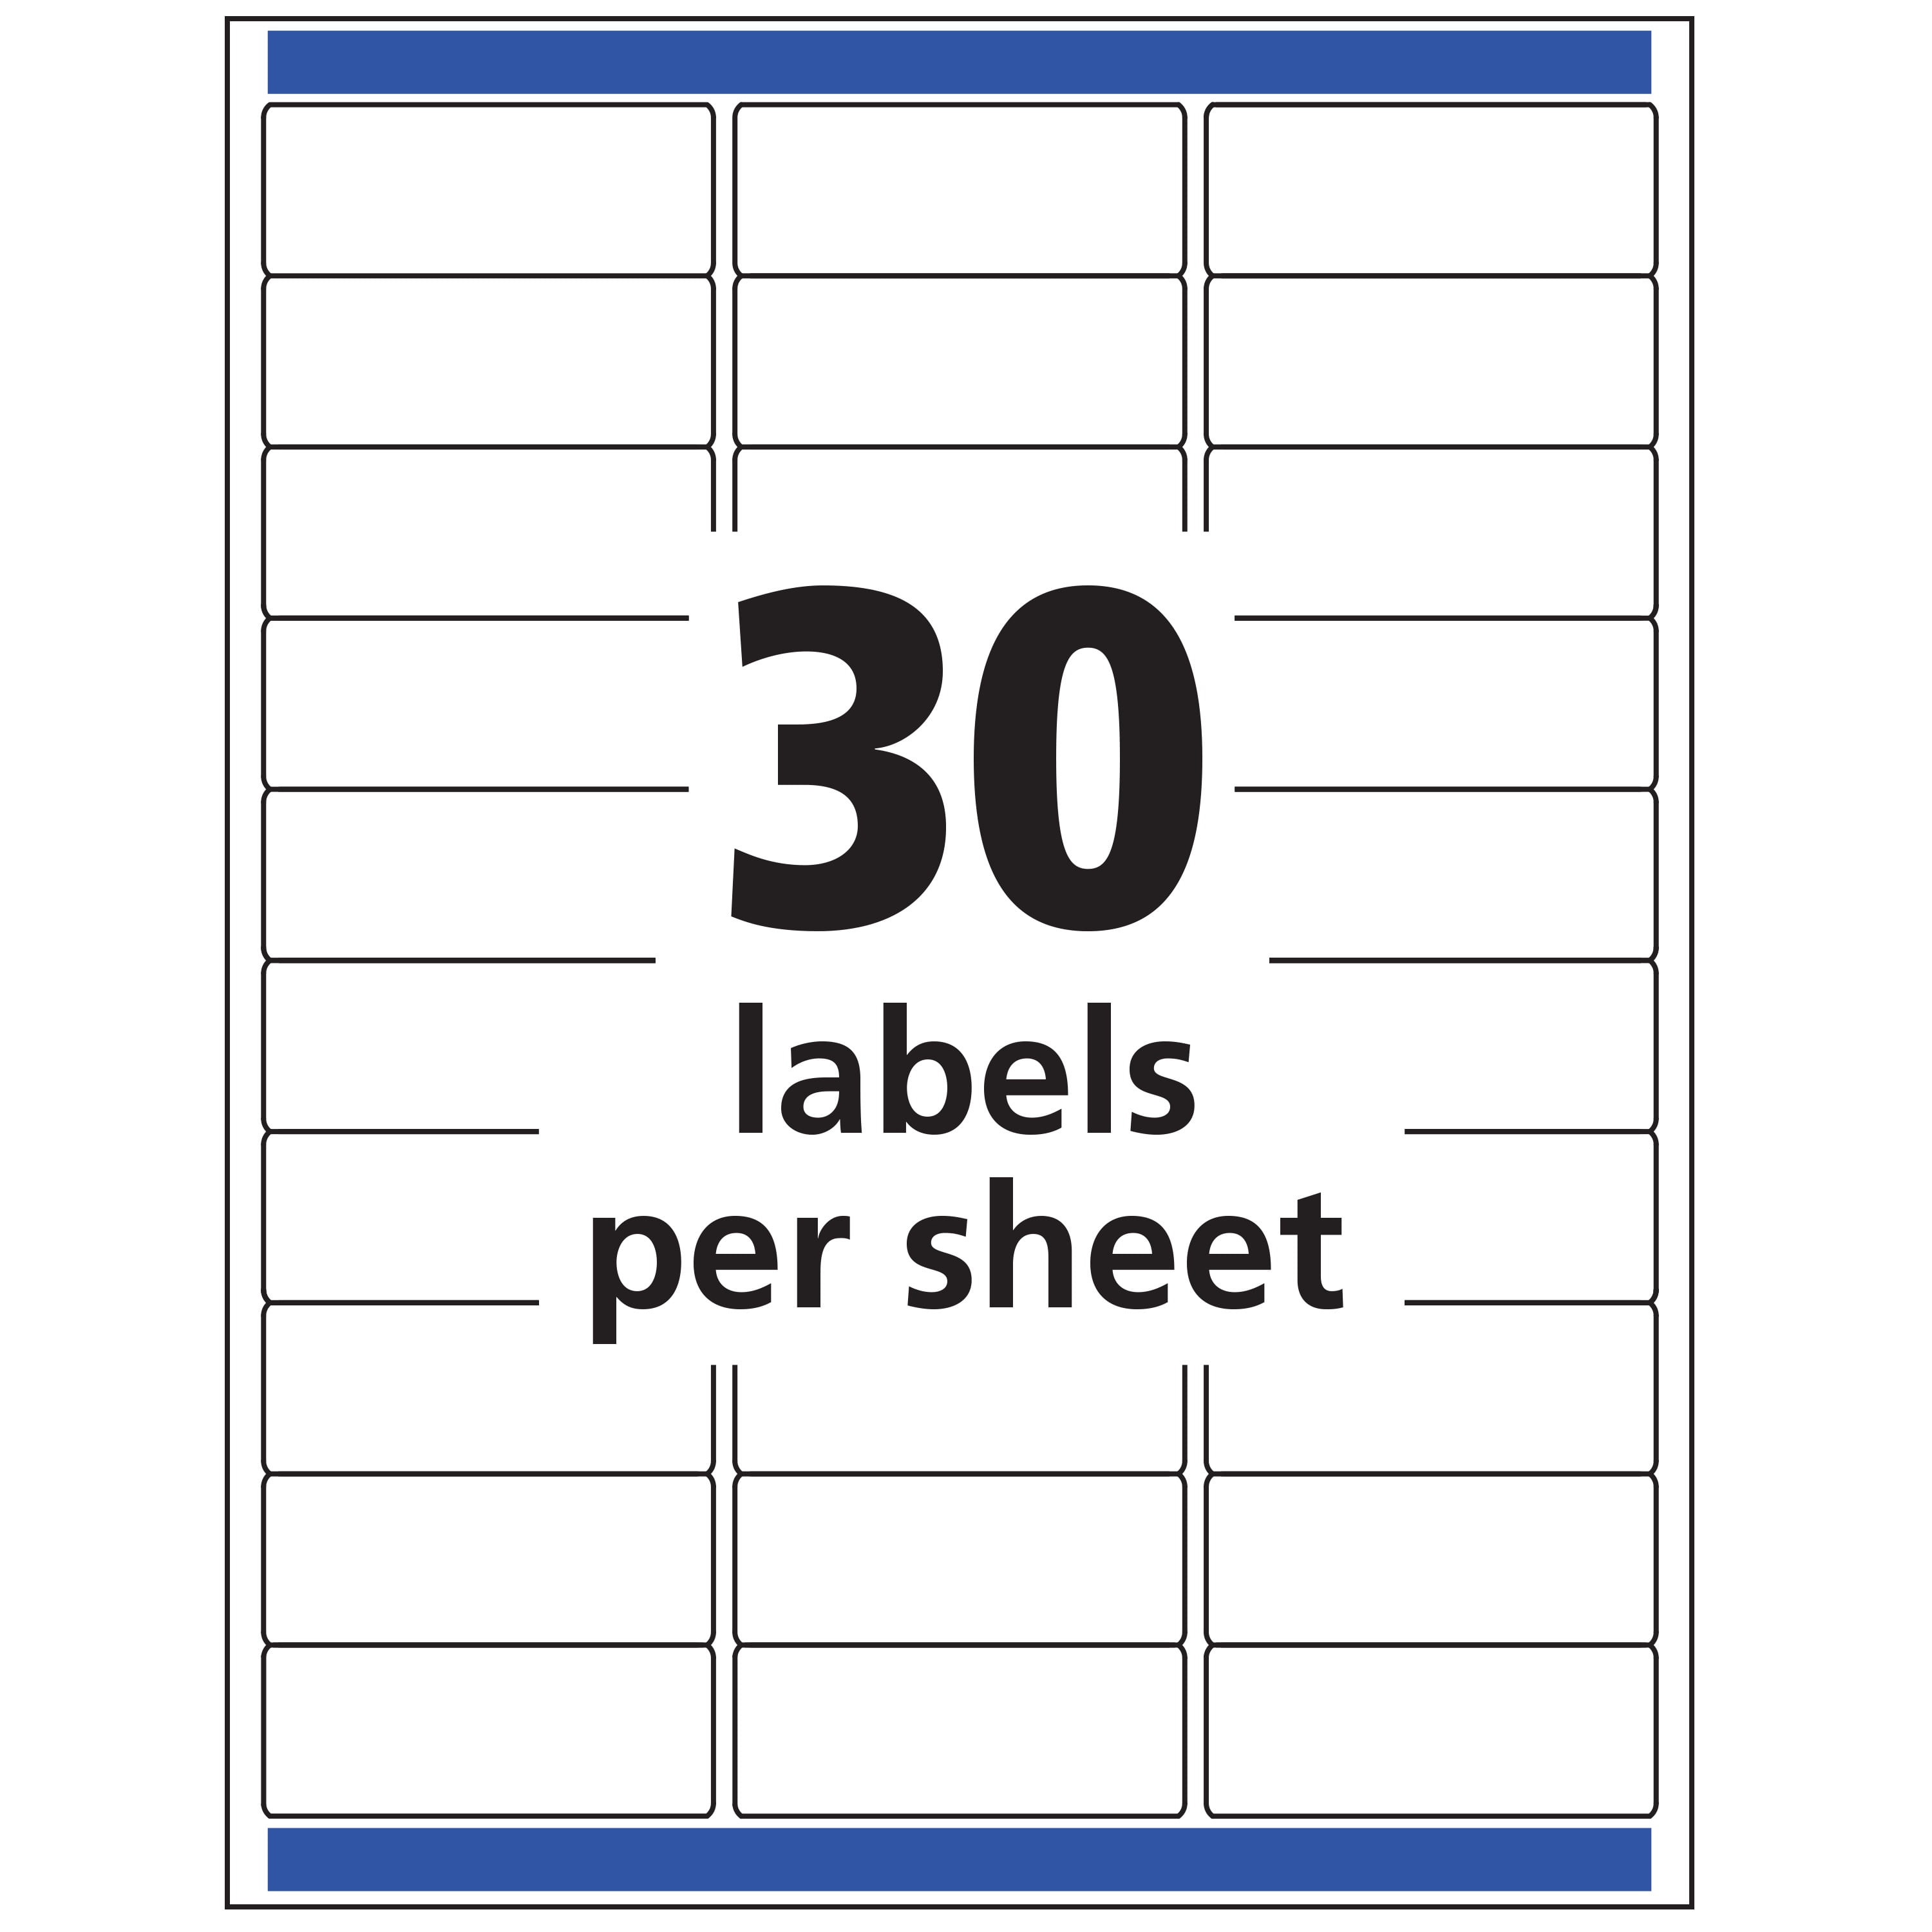 32 Avery Label Template 15660 Labels For Your Ideas